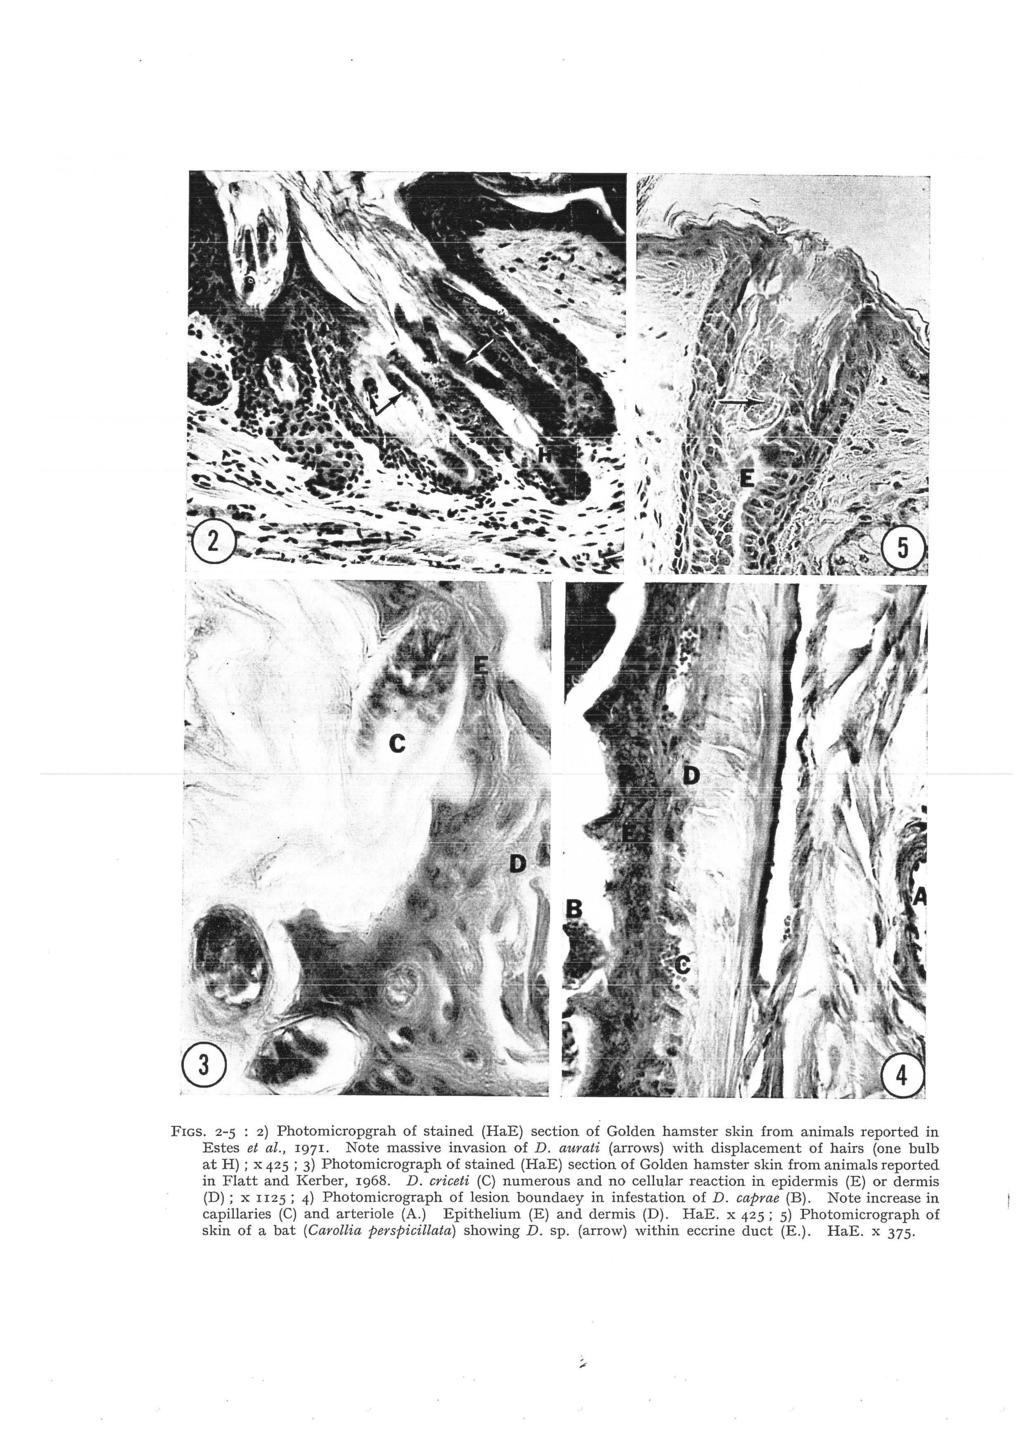 FrGs. 2-5 : 2) Photomicropgrah of stained (HaE) section of Golden hamster skin from animals reported in Estes et al., 1971. Note massive invasion of D.